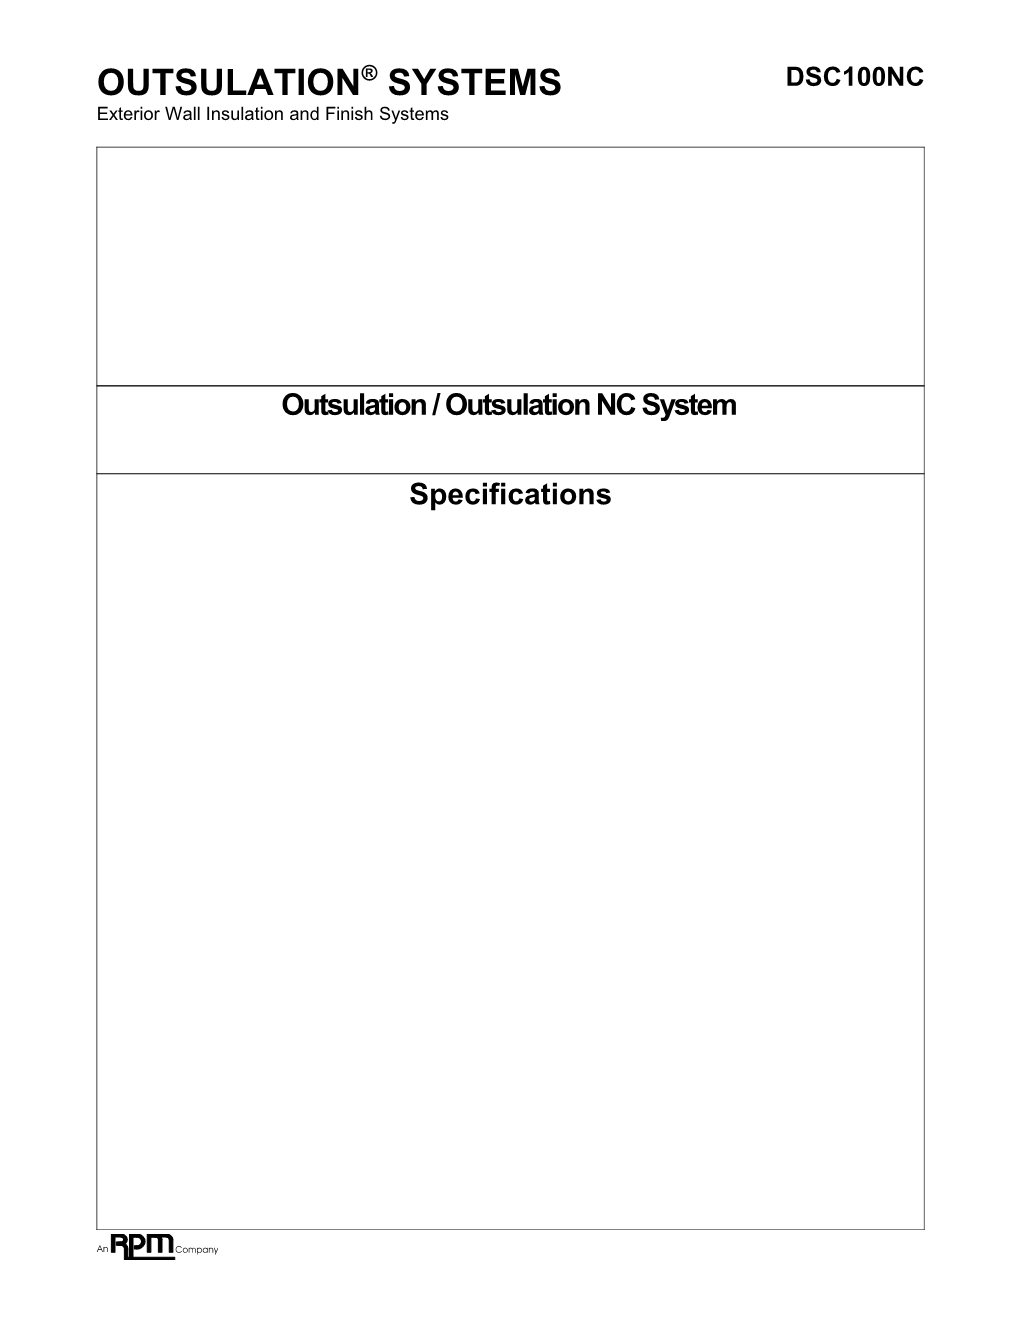 Outsulation Systems Specification DSC100NC